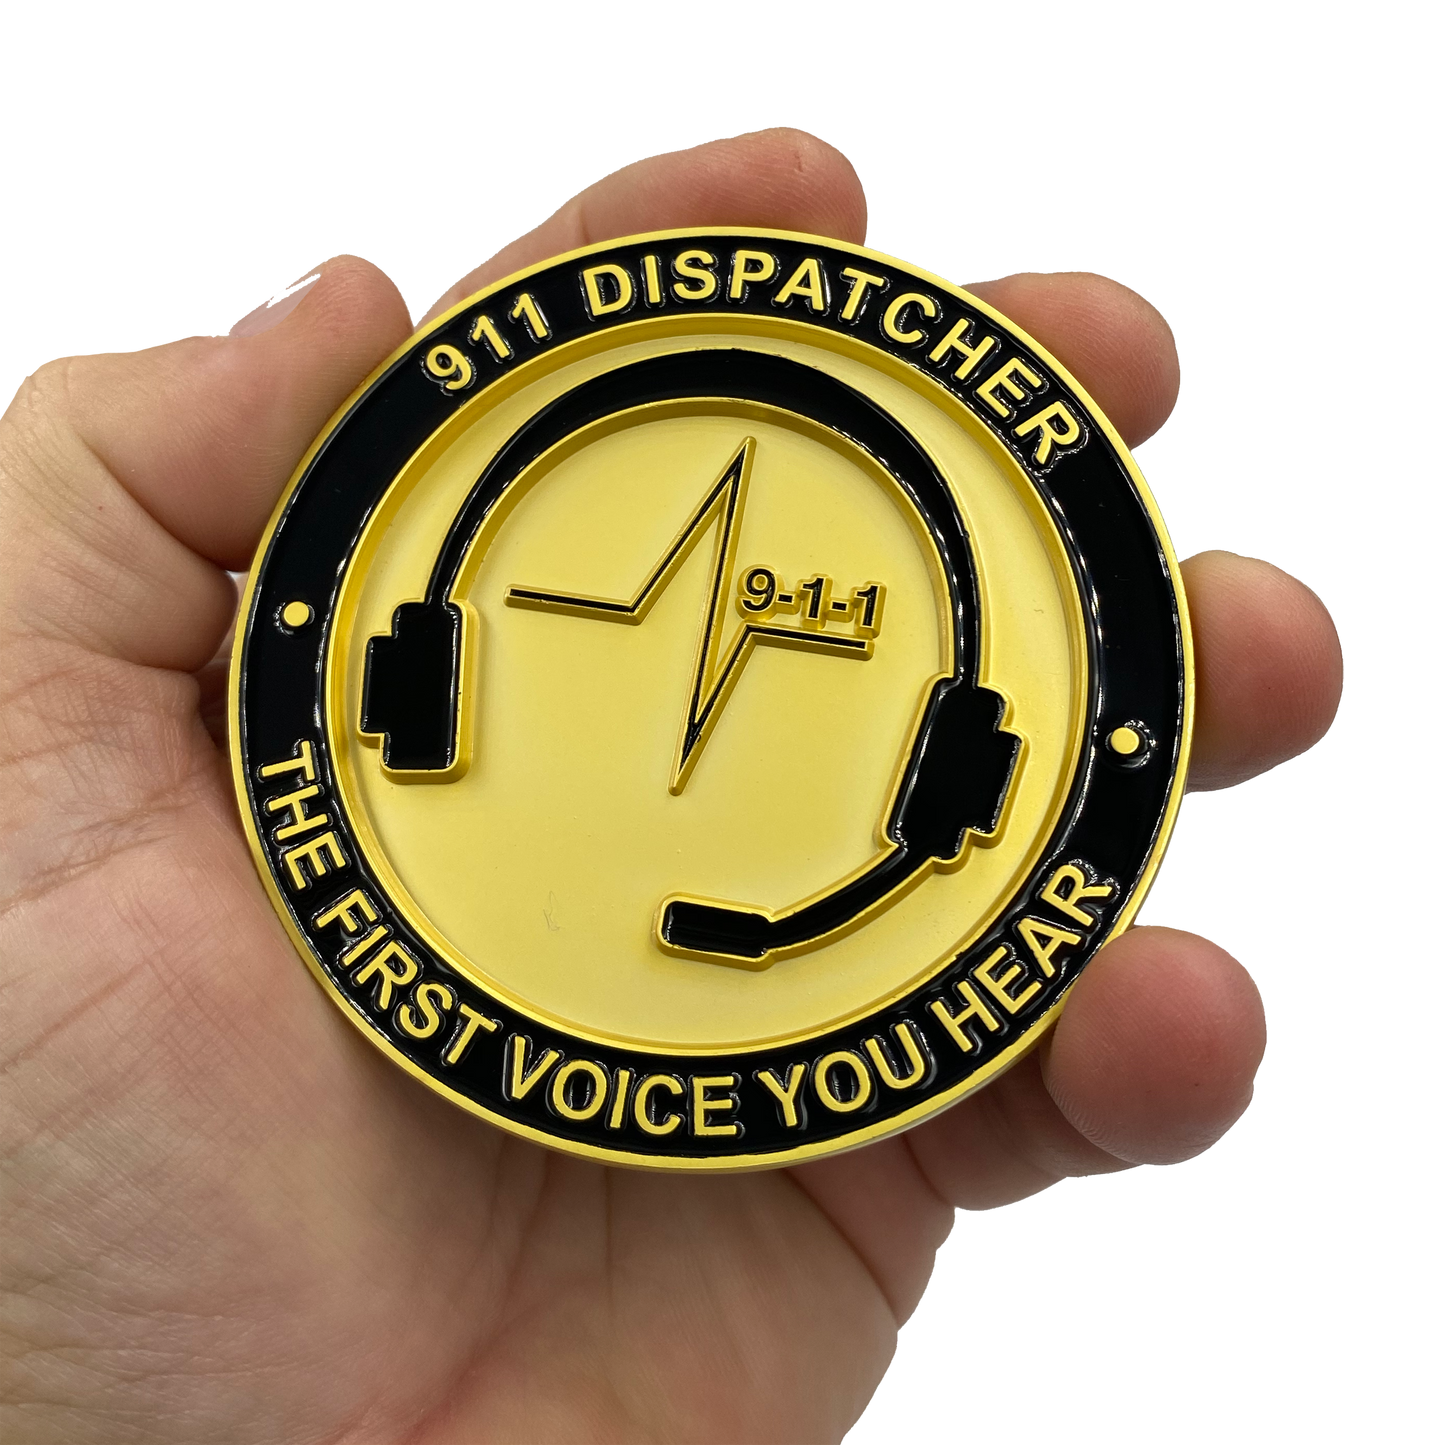 EL4-015 World's Biggest 911 Emergency Dispatcher Challenge Coin Thin Gold Line The First Voice Your Hear